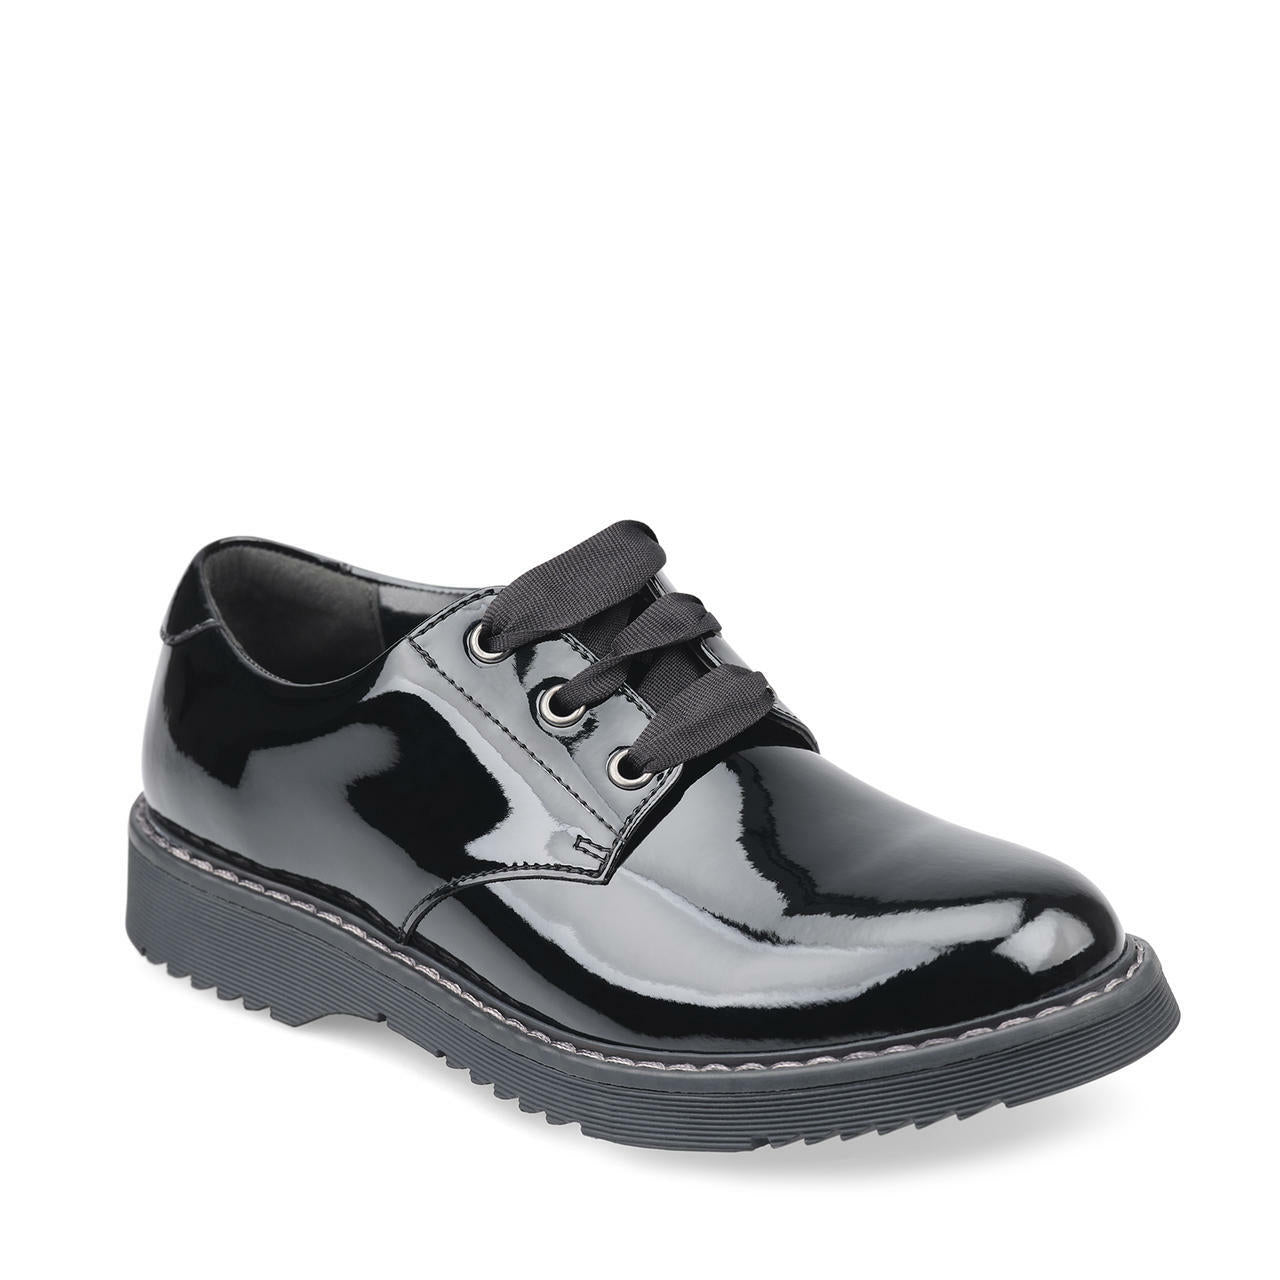 A girls chunky school shoe by Start-Rite Angry Angels, style Impact, in black patent leather with lace up fastening. Right side angled view.